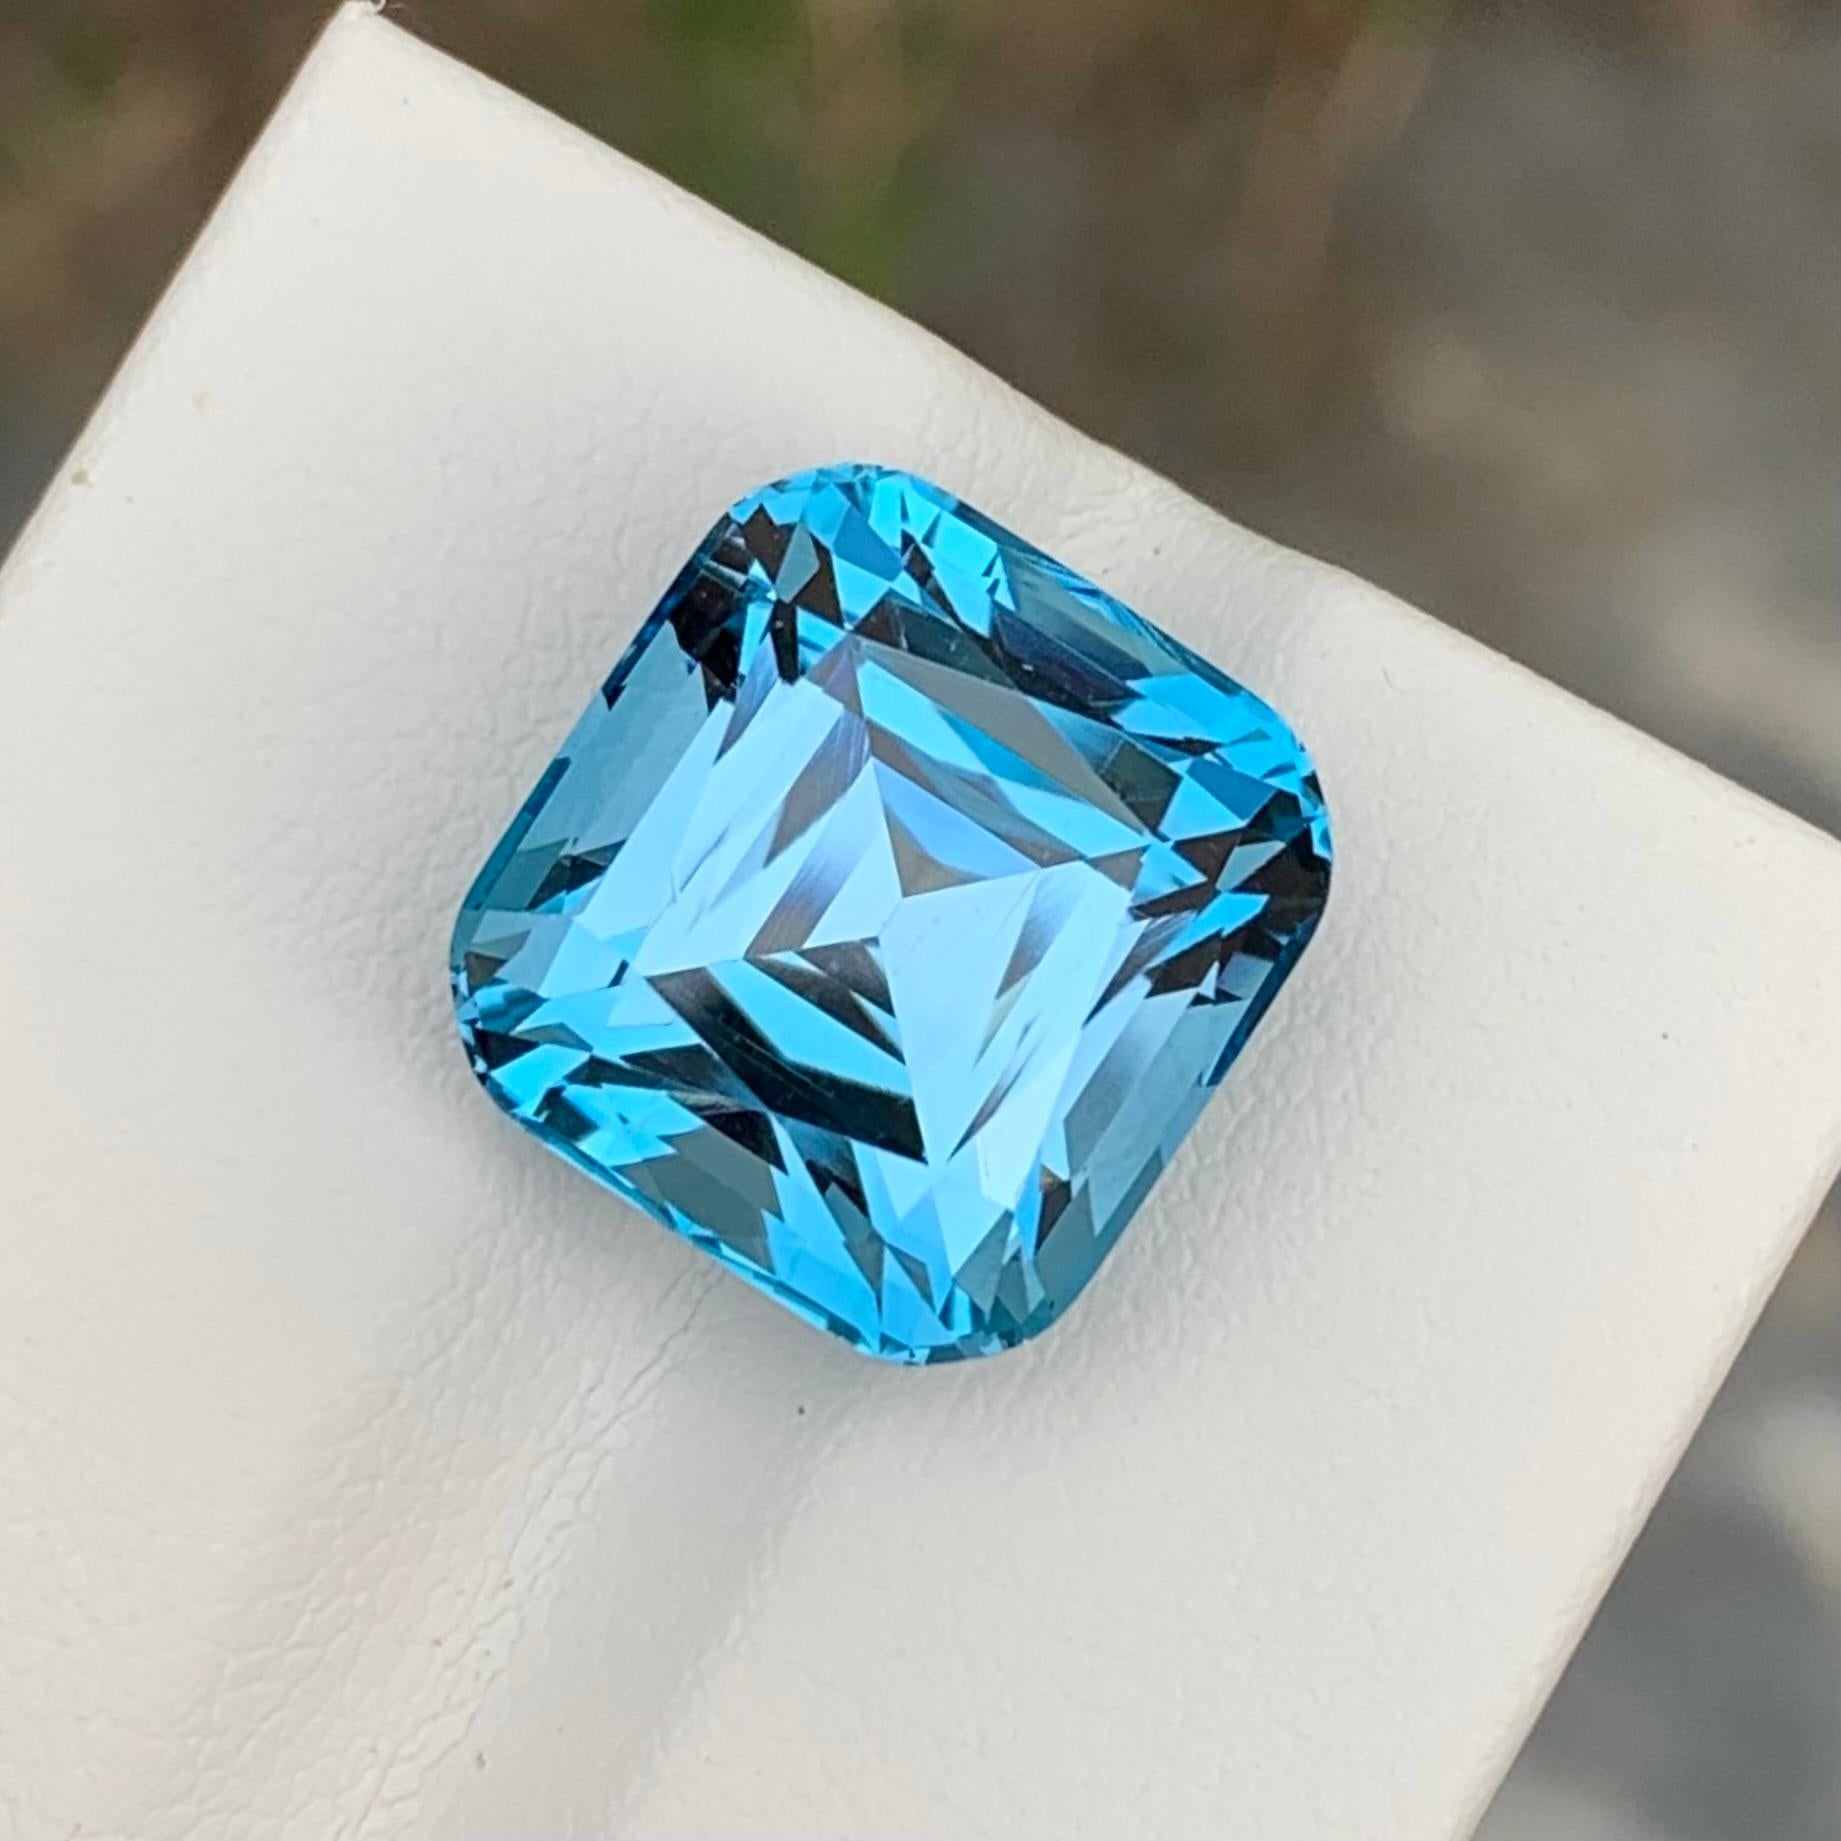 Loose Blue Topaz
Weight: 14.70 Carats 
Dimensions: 13.4x12.7x9.9 Mm
Origin: Brazil
Shape: Cushion
Color: Blue
Treatment: Non
Certificate: On Demand 
Benefits Of Wearing Blue Topaz Stone:
It helps to improve communication and self-expression.
It